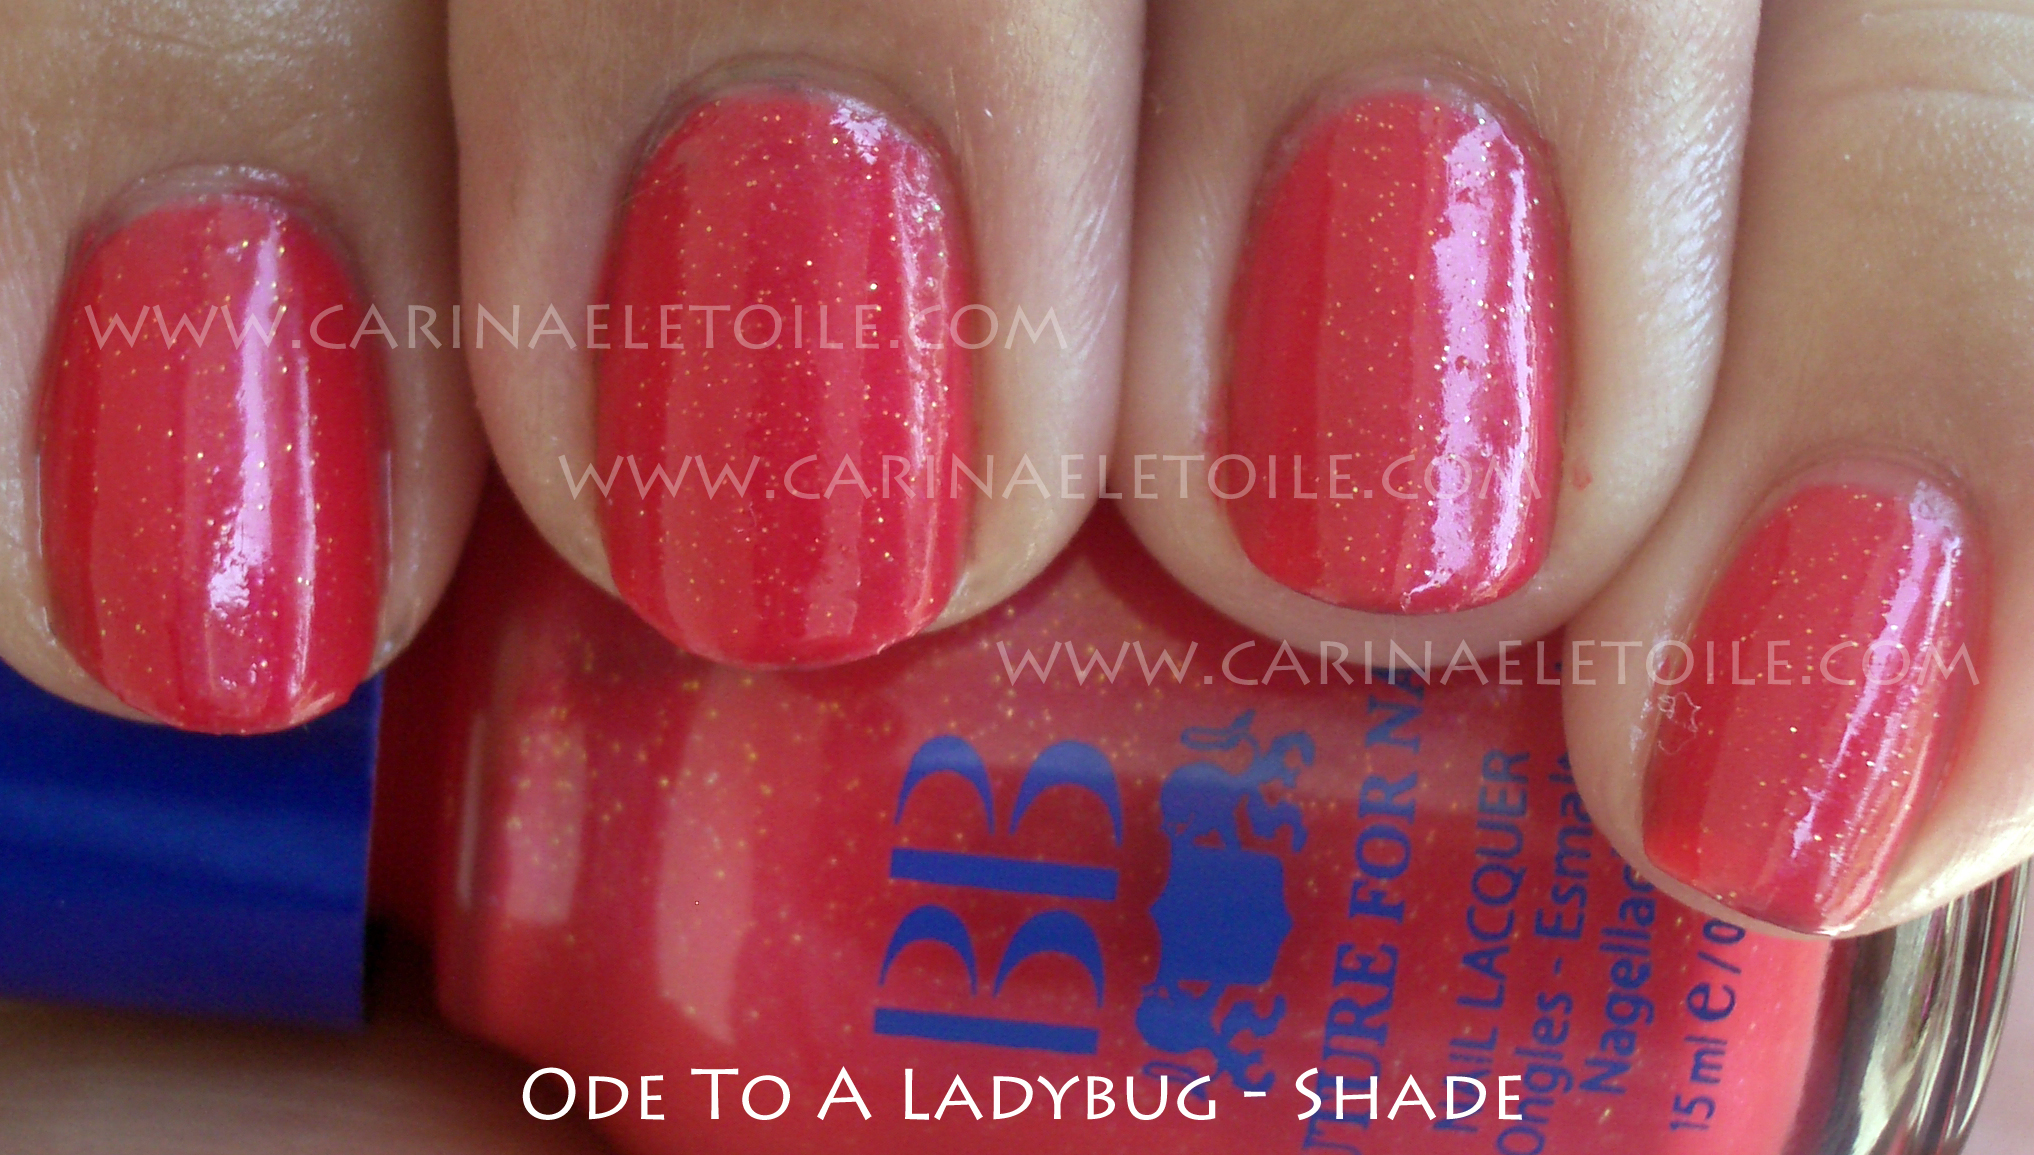 BB Couture Ode To A Ladybug